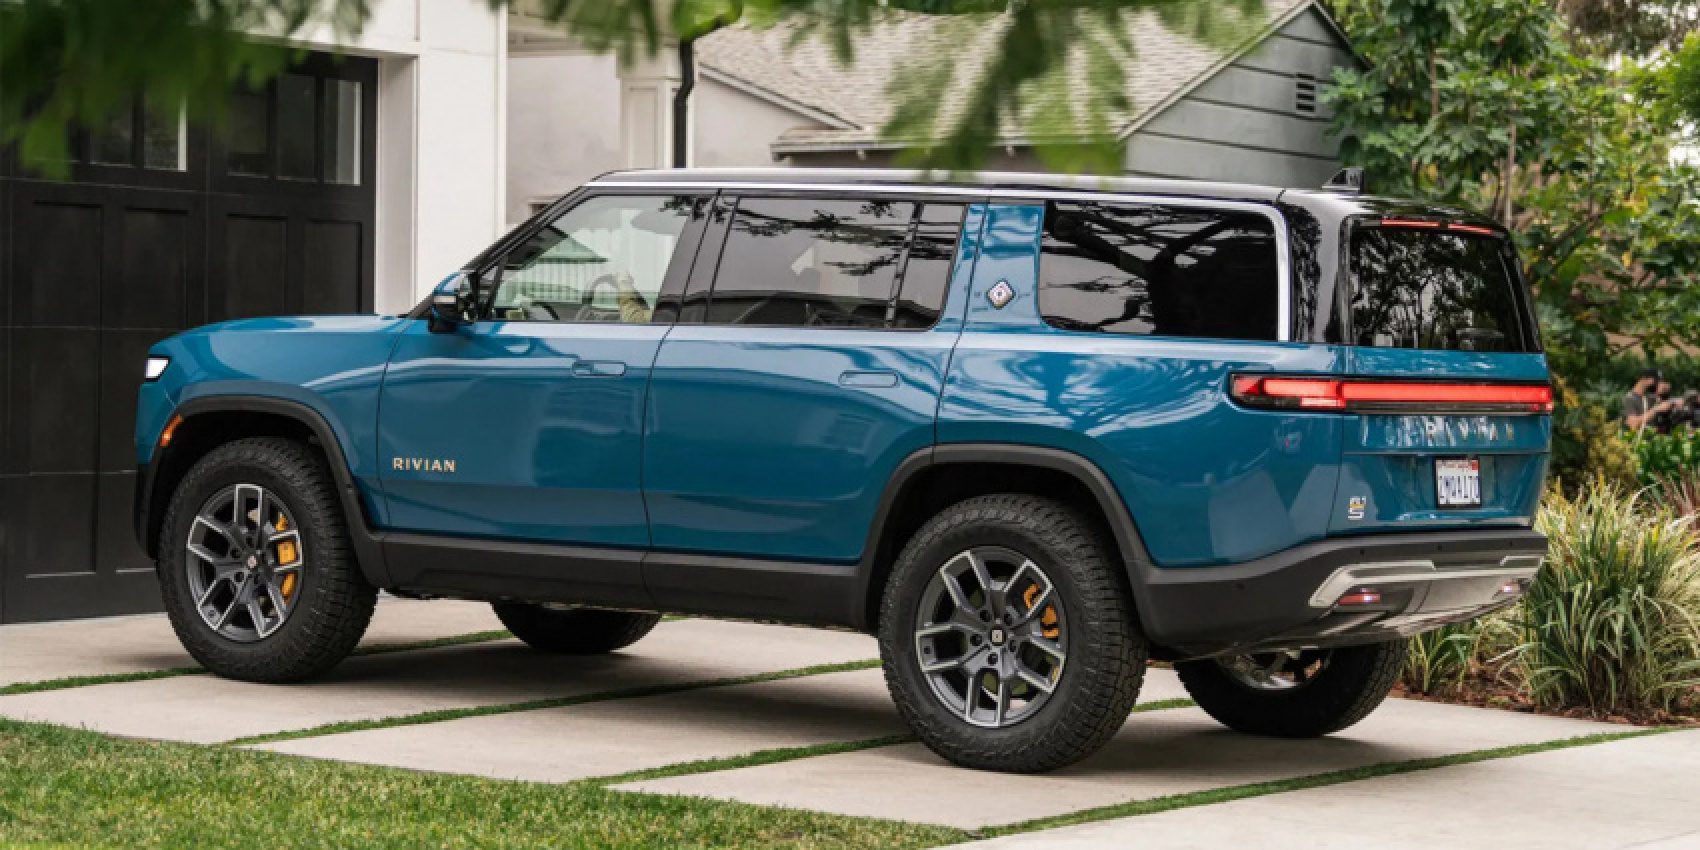 autos, cars, rivian, after backlash, rivian backtracks on price hike in letter from founder/ceo rj scaringe